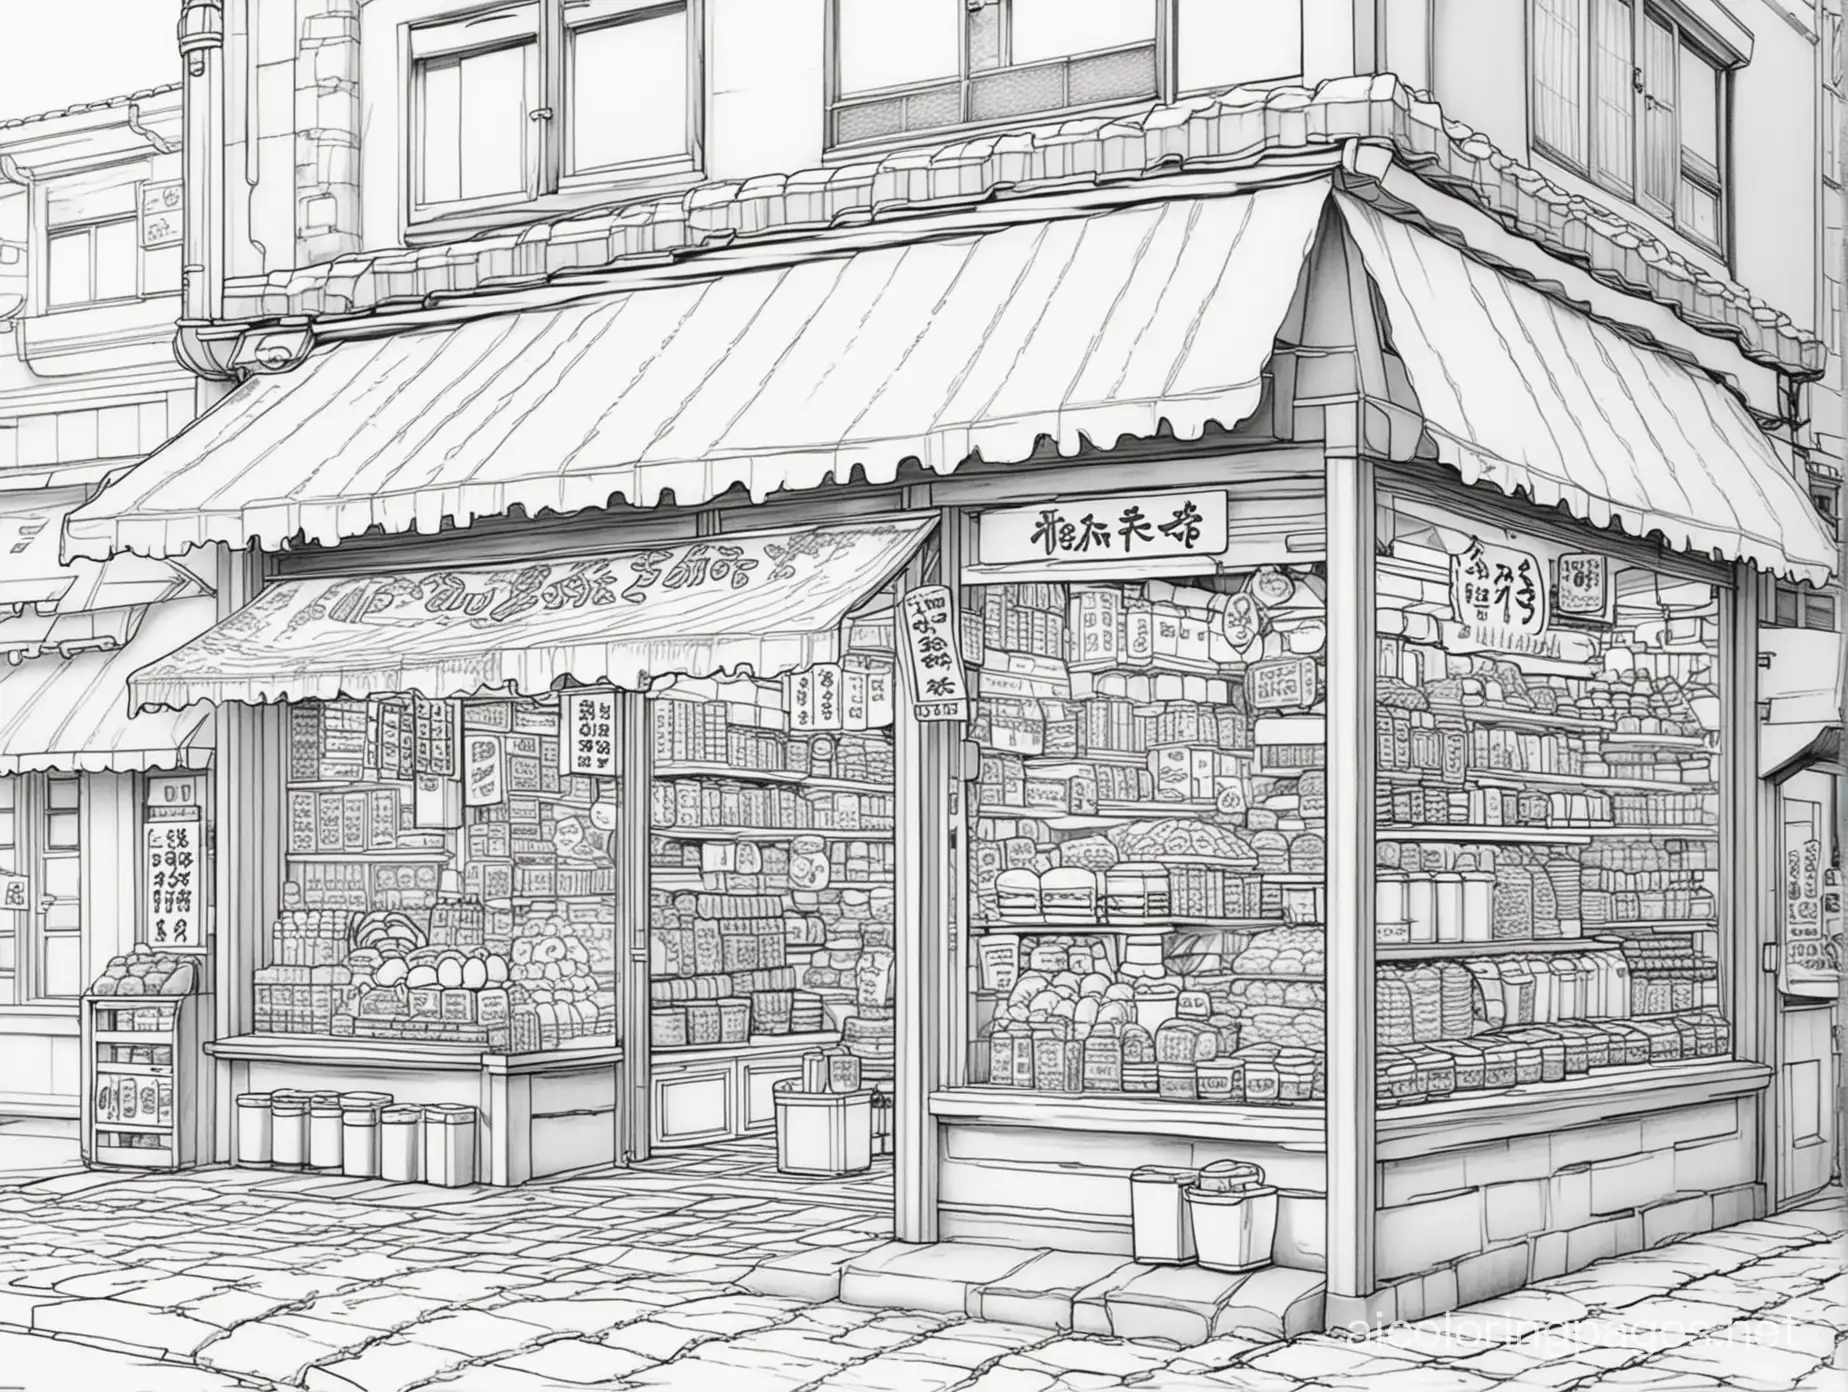 Showa Japan confectionery shop, Coloring Page, black and white, line art, white background, Simplicity, Ample White Space. The background of the coloring page is plain white to make it easy for young children to color within the lines. The outlines of all the subjects are easy to distinguish, making it simple for kids to color without too much difficulty